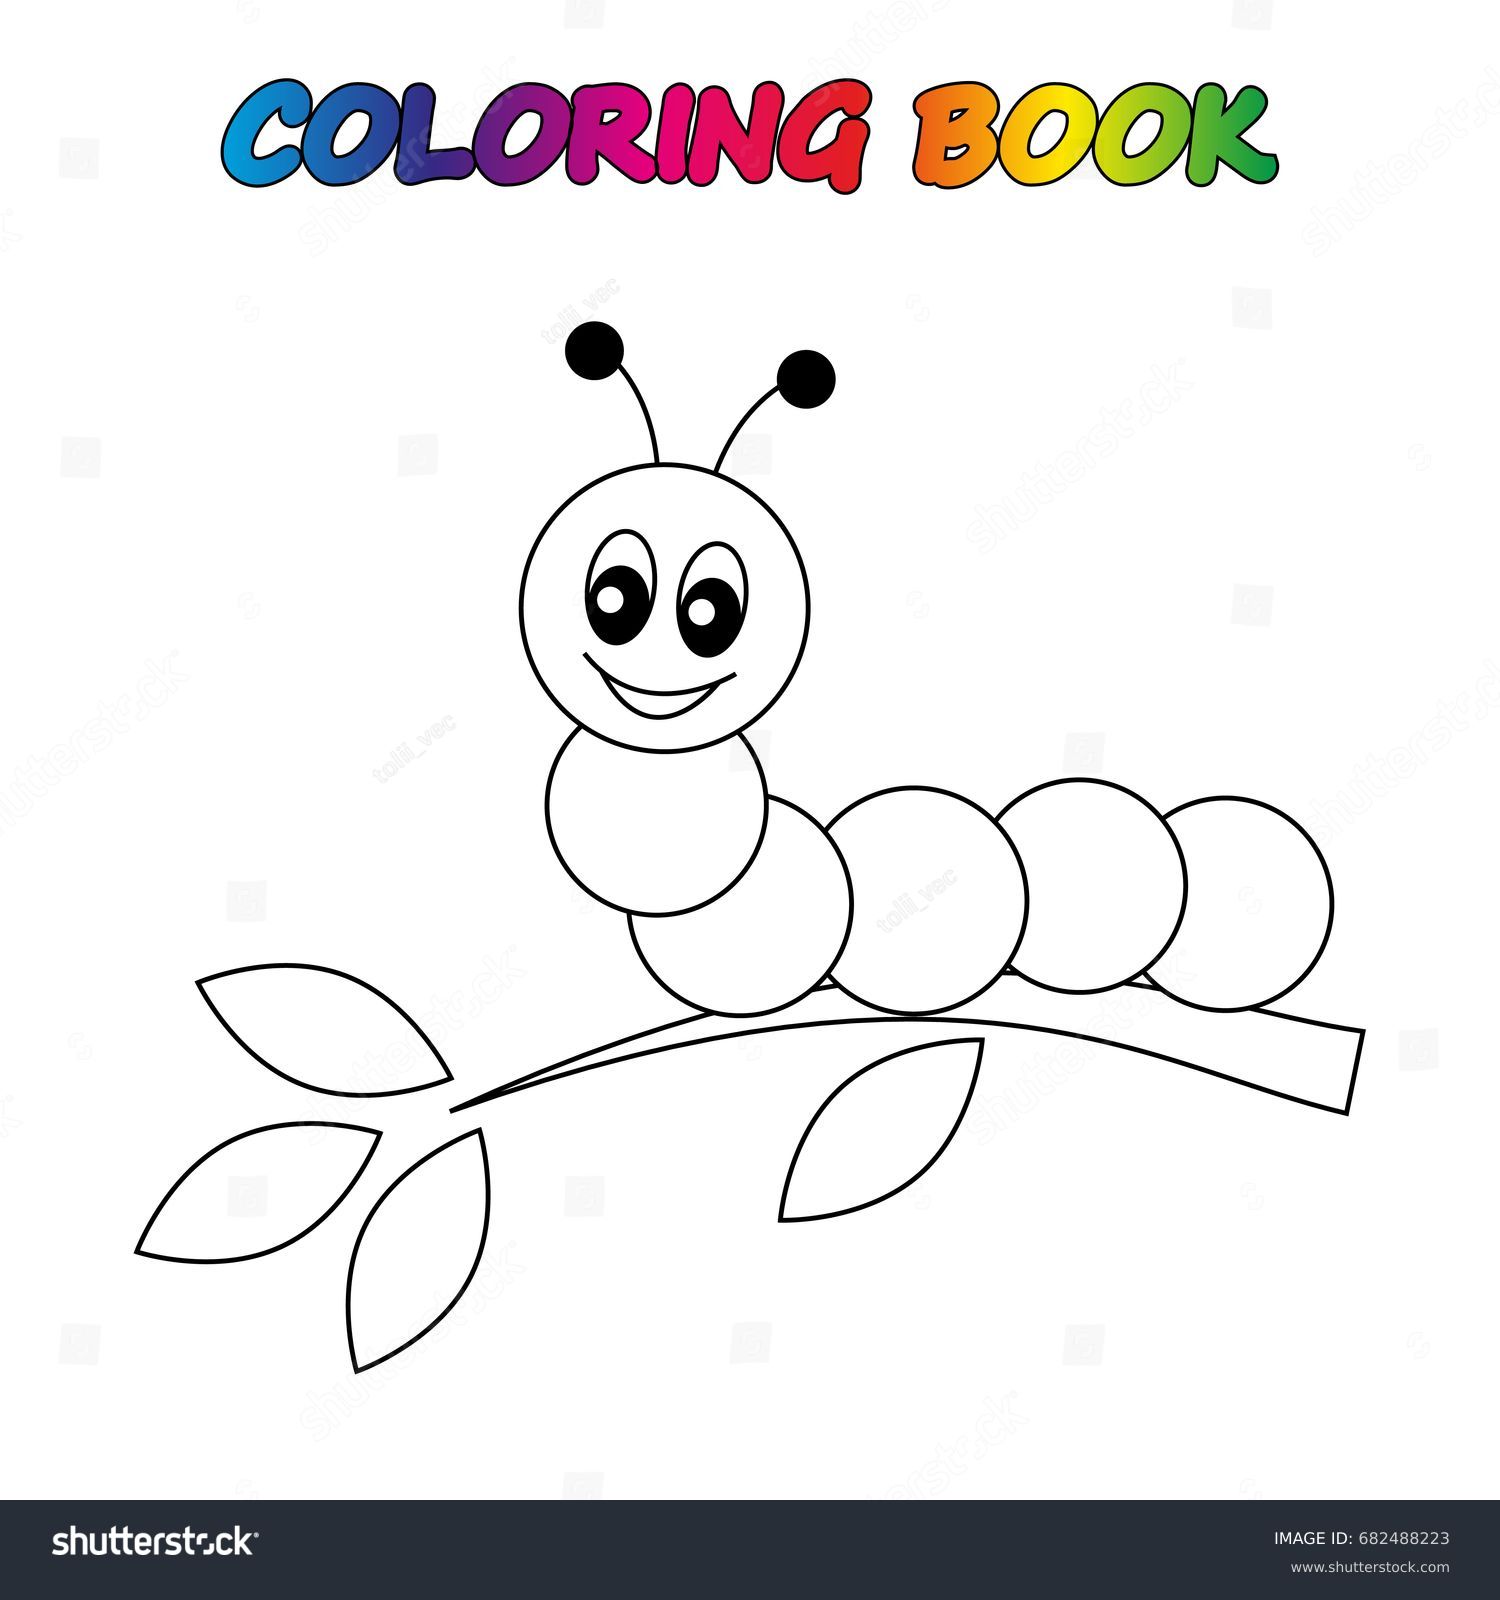 Caterpillar Coloring Book Coloring Page Educate Stock Vector ...